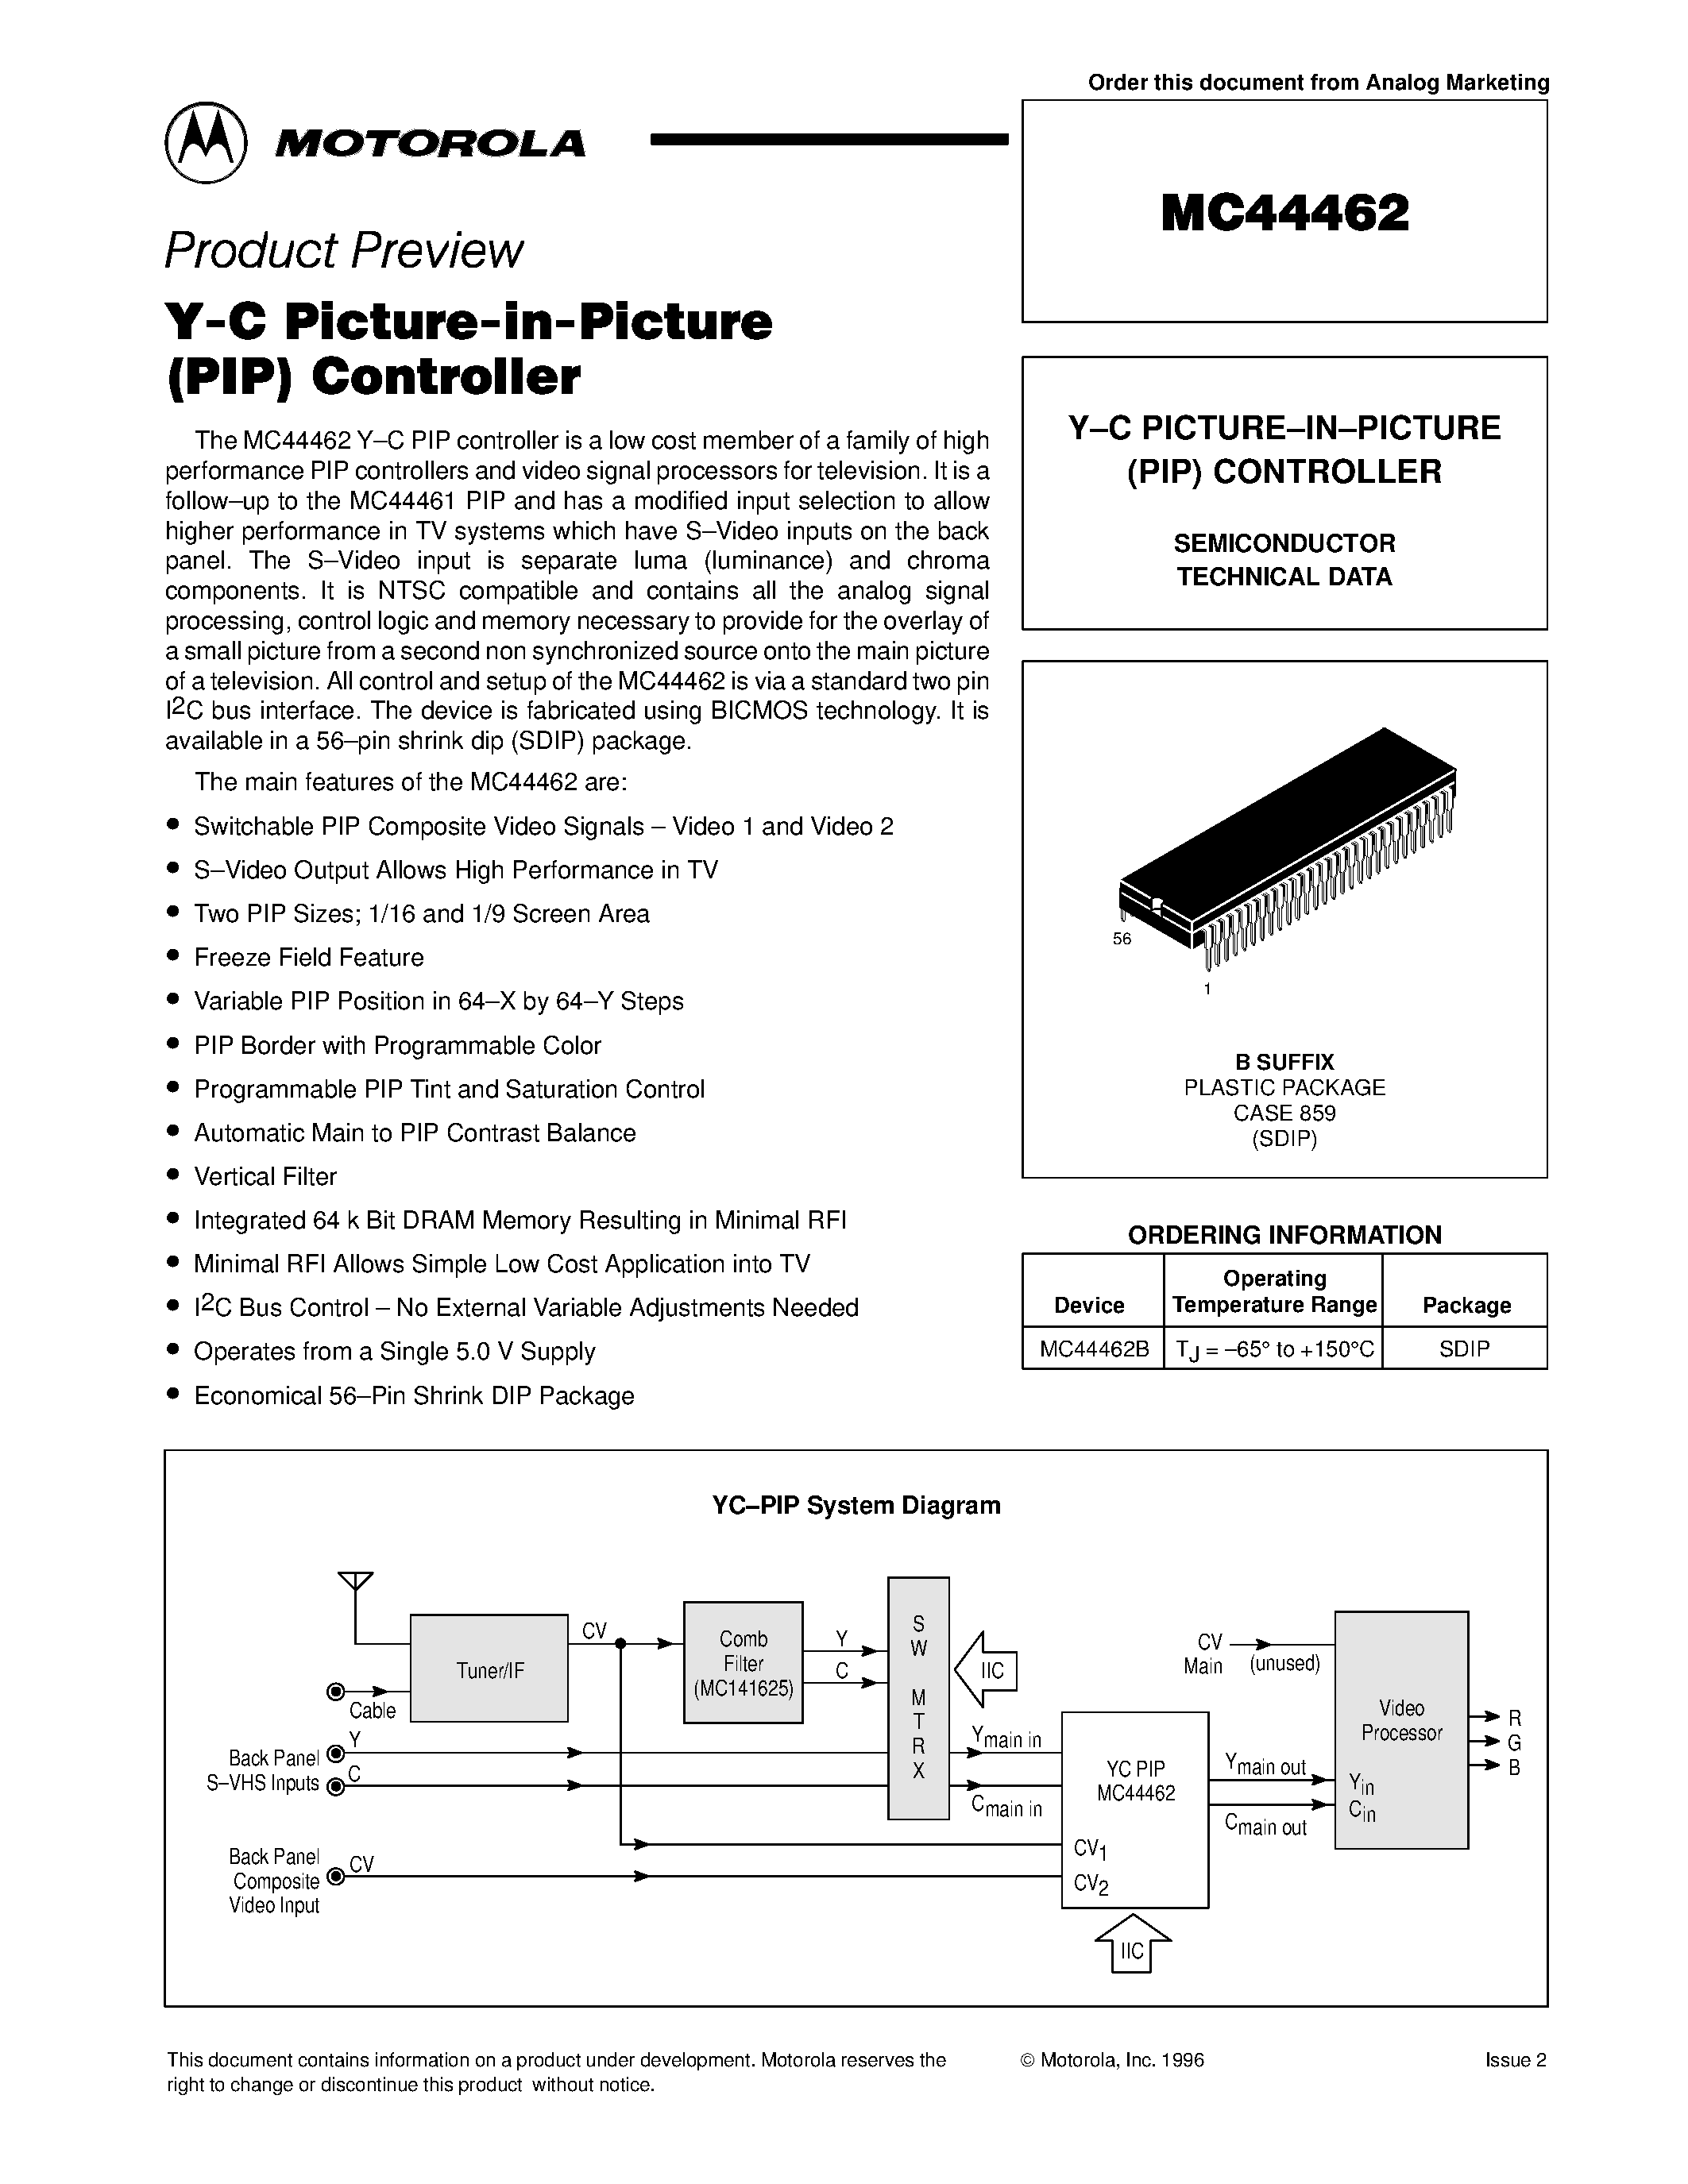 Datasheet MC44462 - Y-C PICTURE-IN-PICTURE (PIP) CONTROLLER page 1